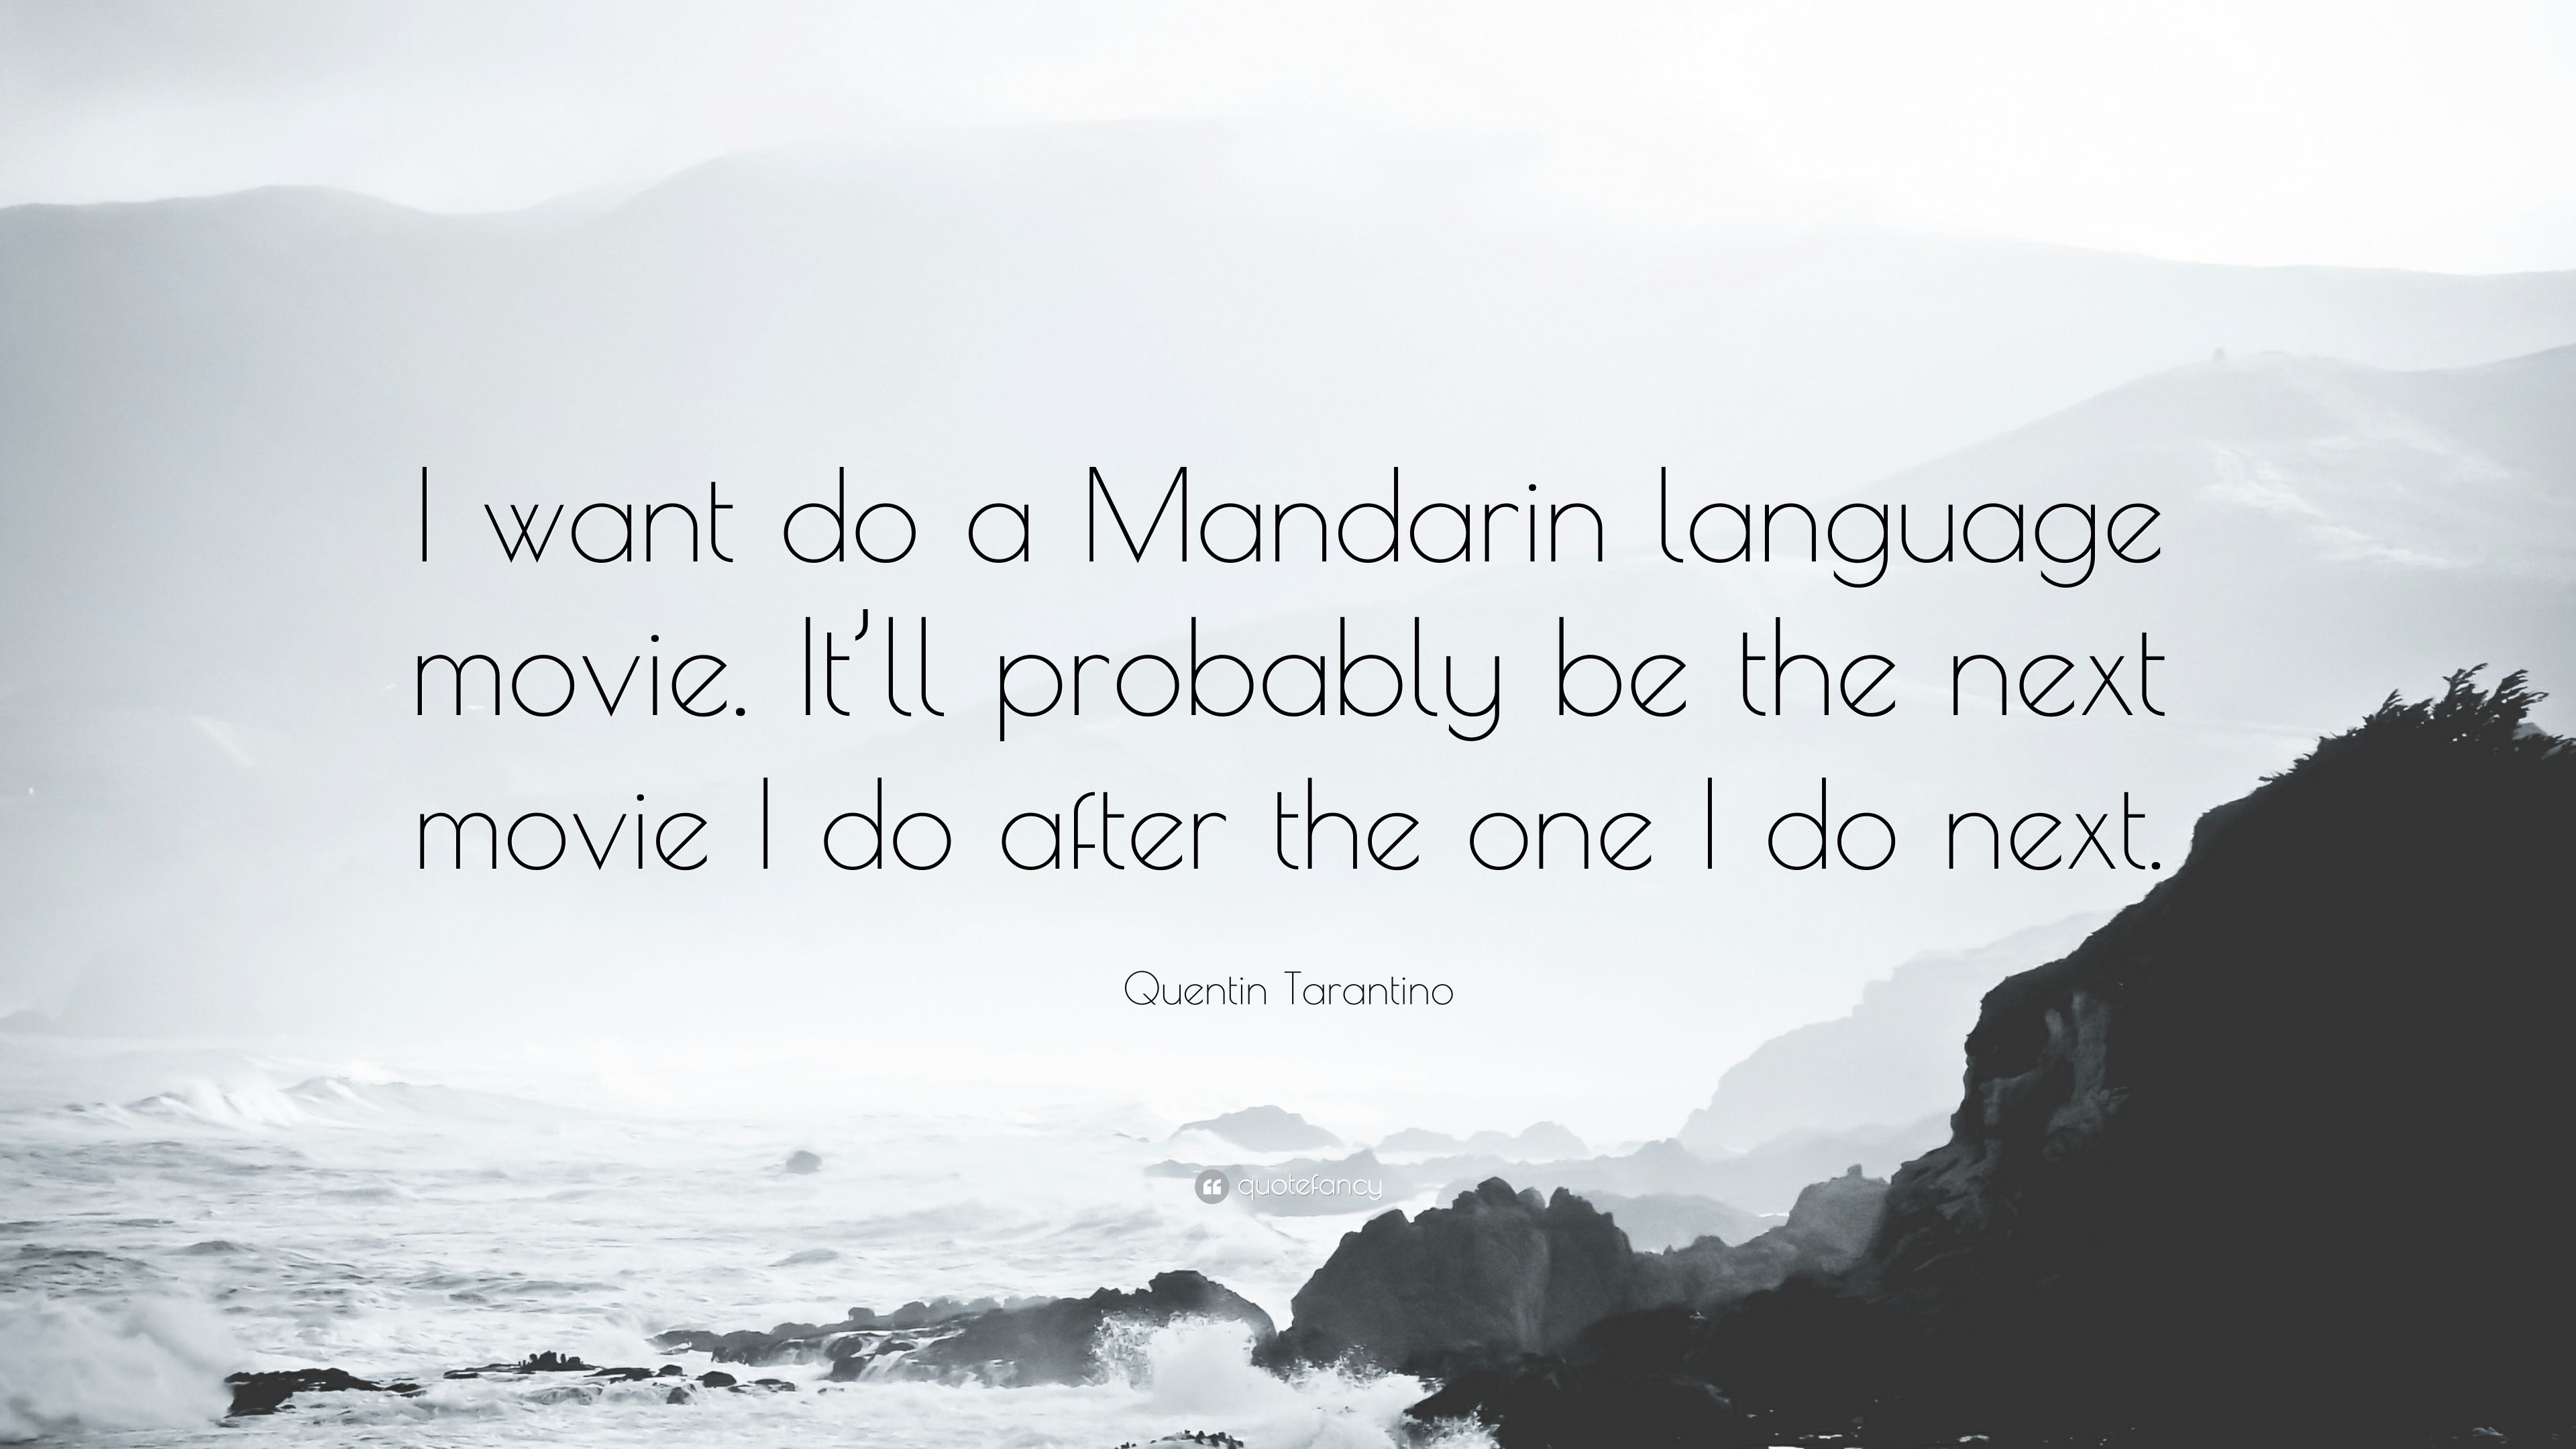 Quentin Tarantino Quote: “I want do a Mandarin language movie. It'll probably be the next movie I do after the one I do next.” (7 wallpaper)